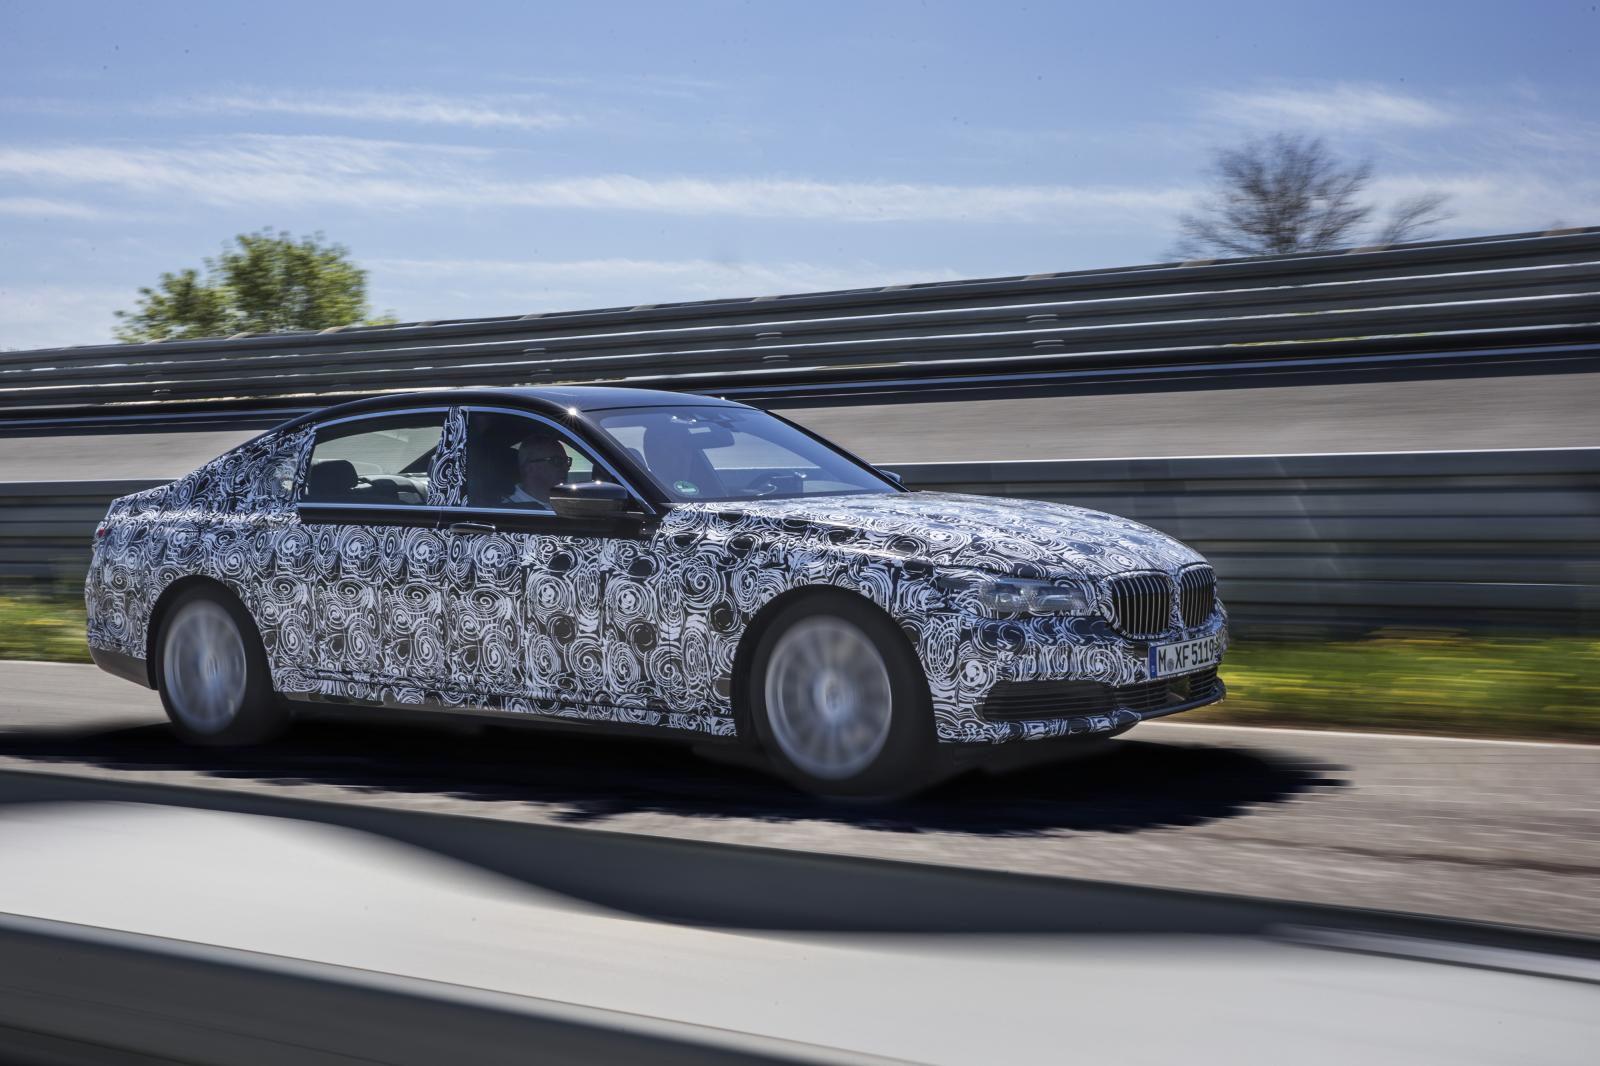 YEN BMW 7 SERS 2015 TEST PROTOTP RESM GALERS